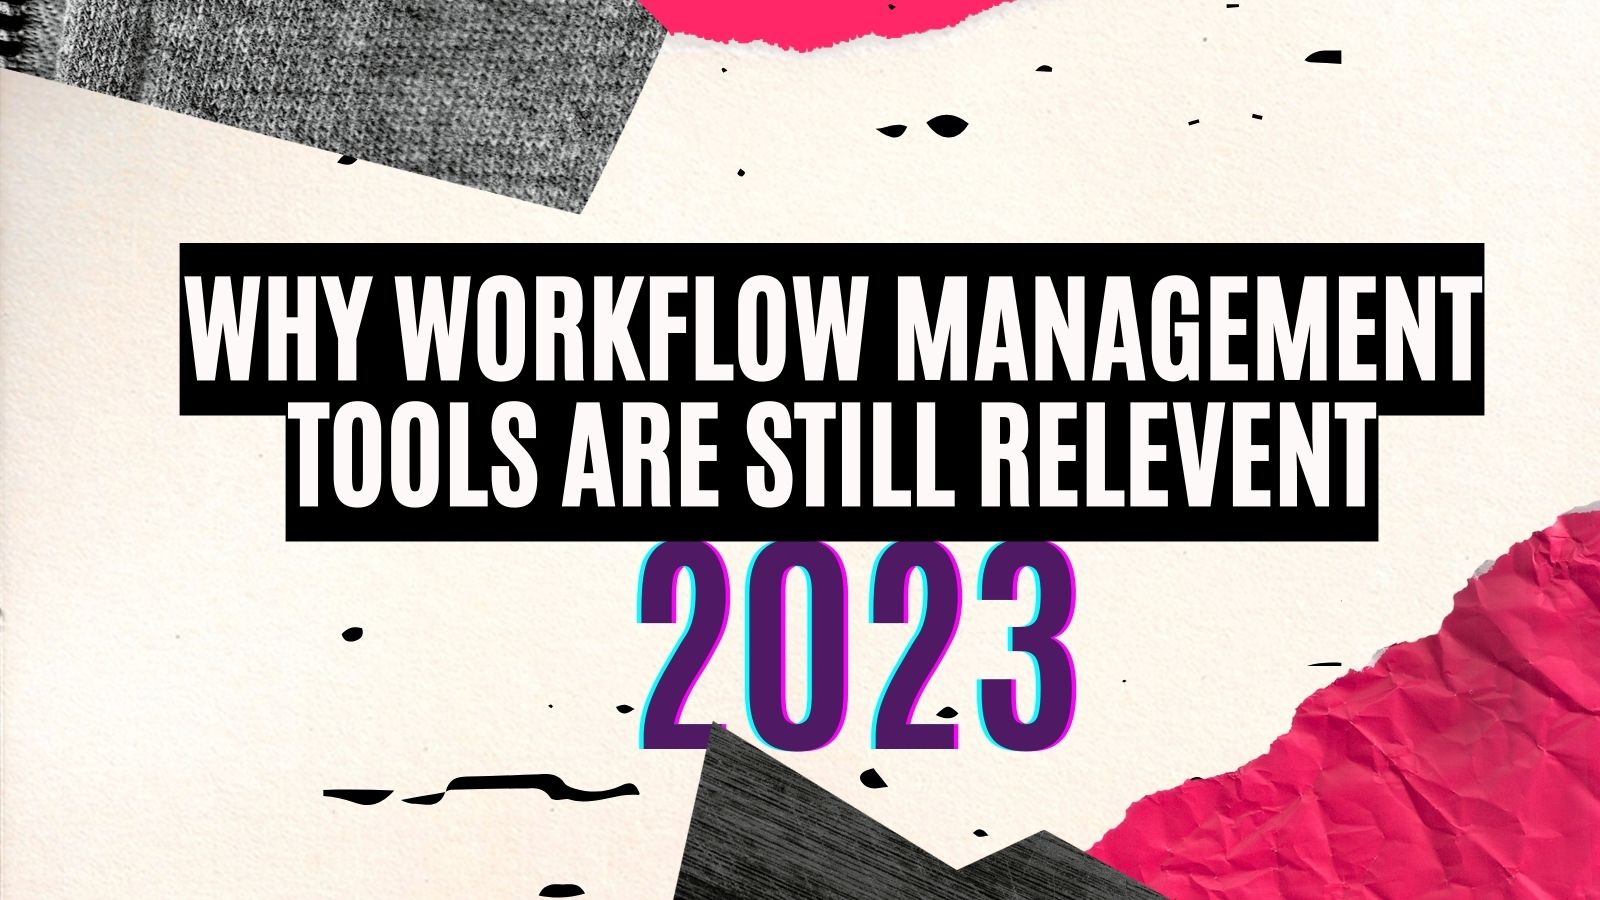 Why workflow management tools are still relevent